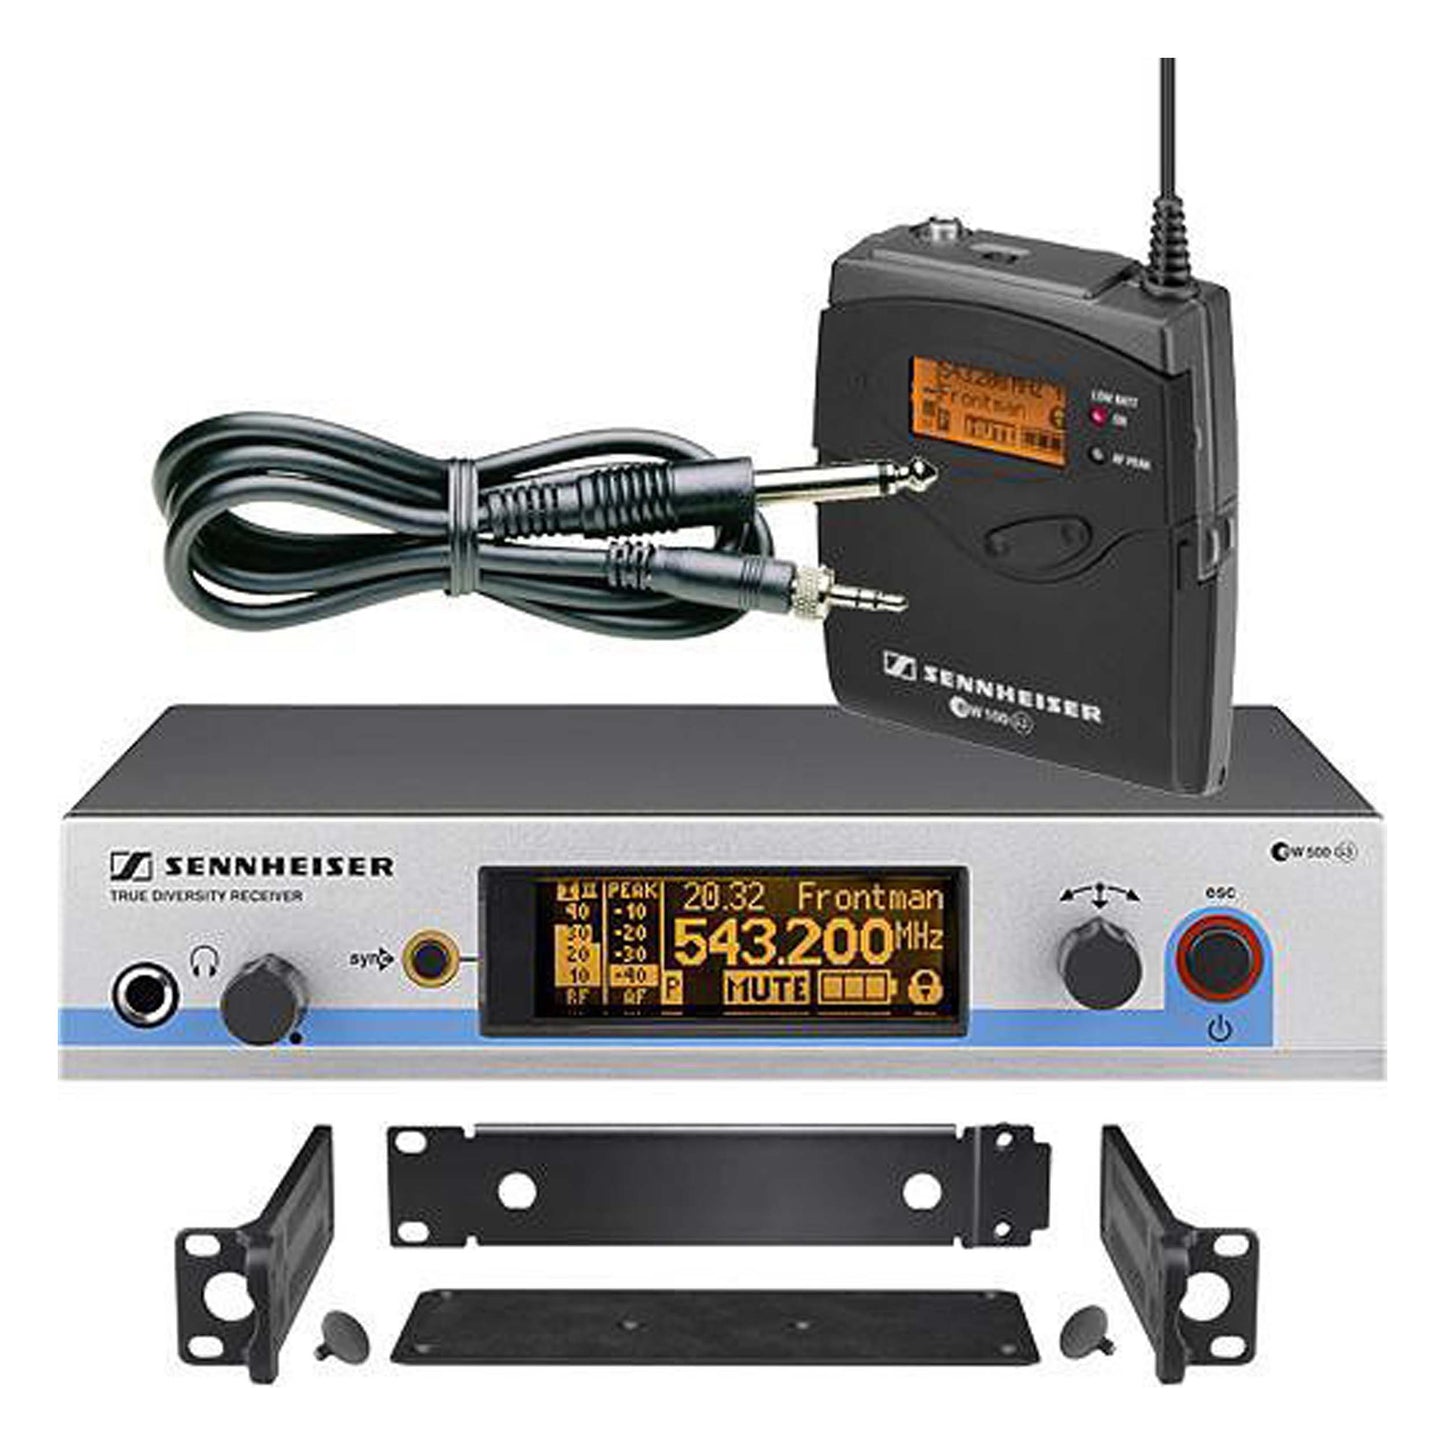 Sennheiser Ew 572 G3 Wireless Instrument System with CI 1 Guitar Cable (A1)